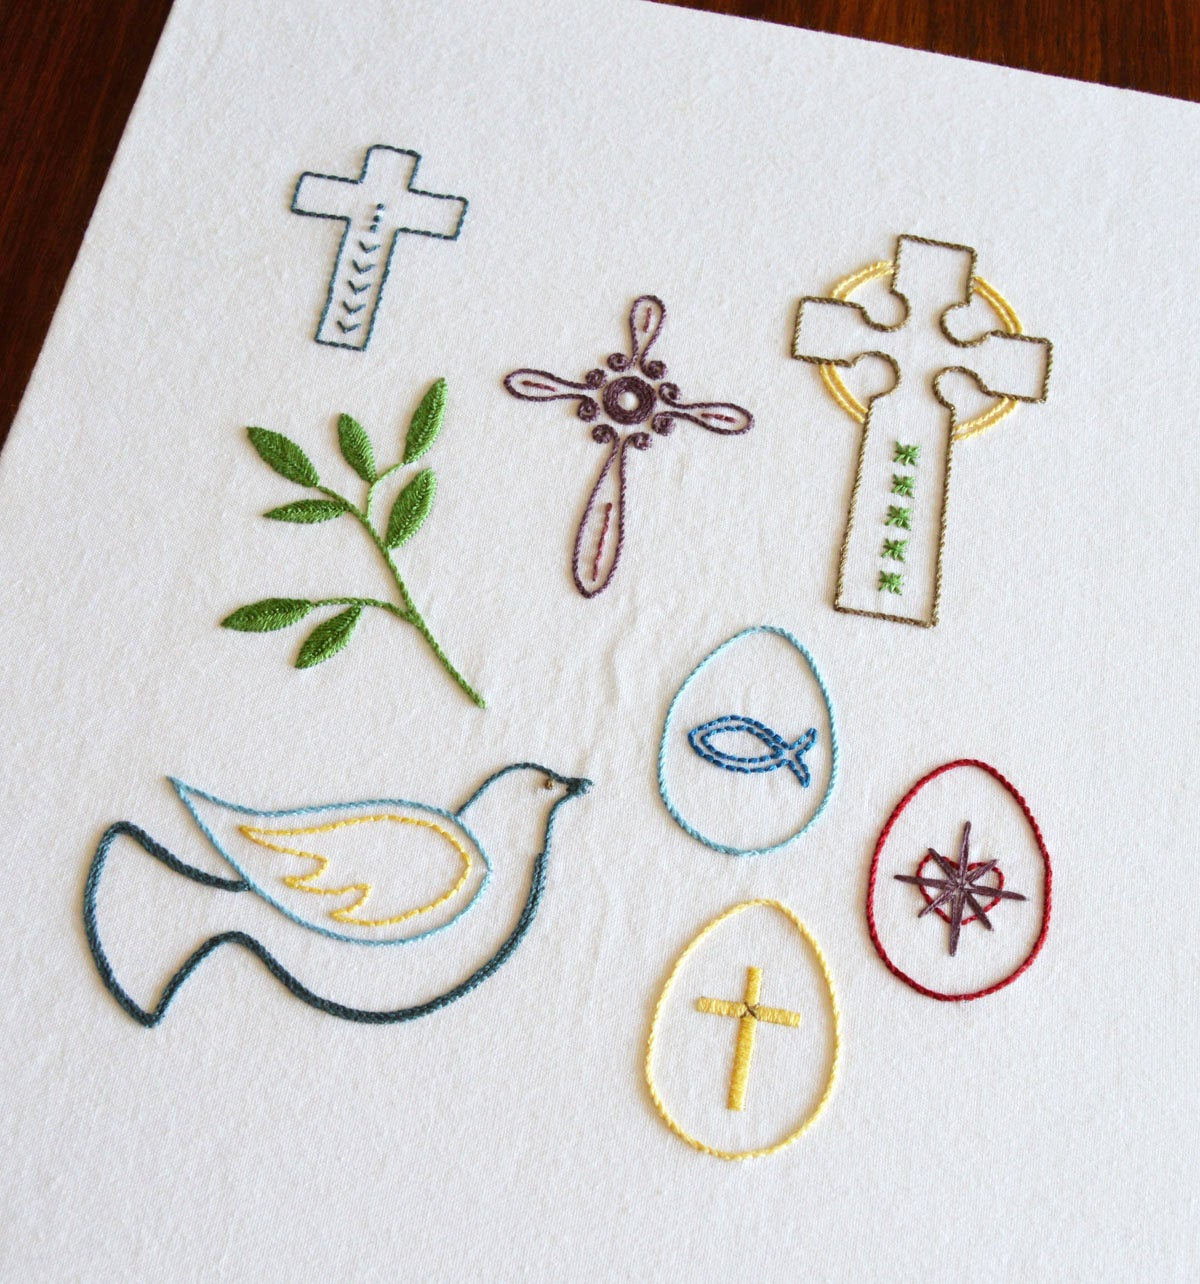 Ecclesiastical Embroidery Patterns Easter Icons Hand Embroidery Pattern Modern Embroidery Religious Symbols Easter Cross Dove Olive Branch Lent Embroidery Patterns